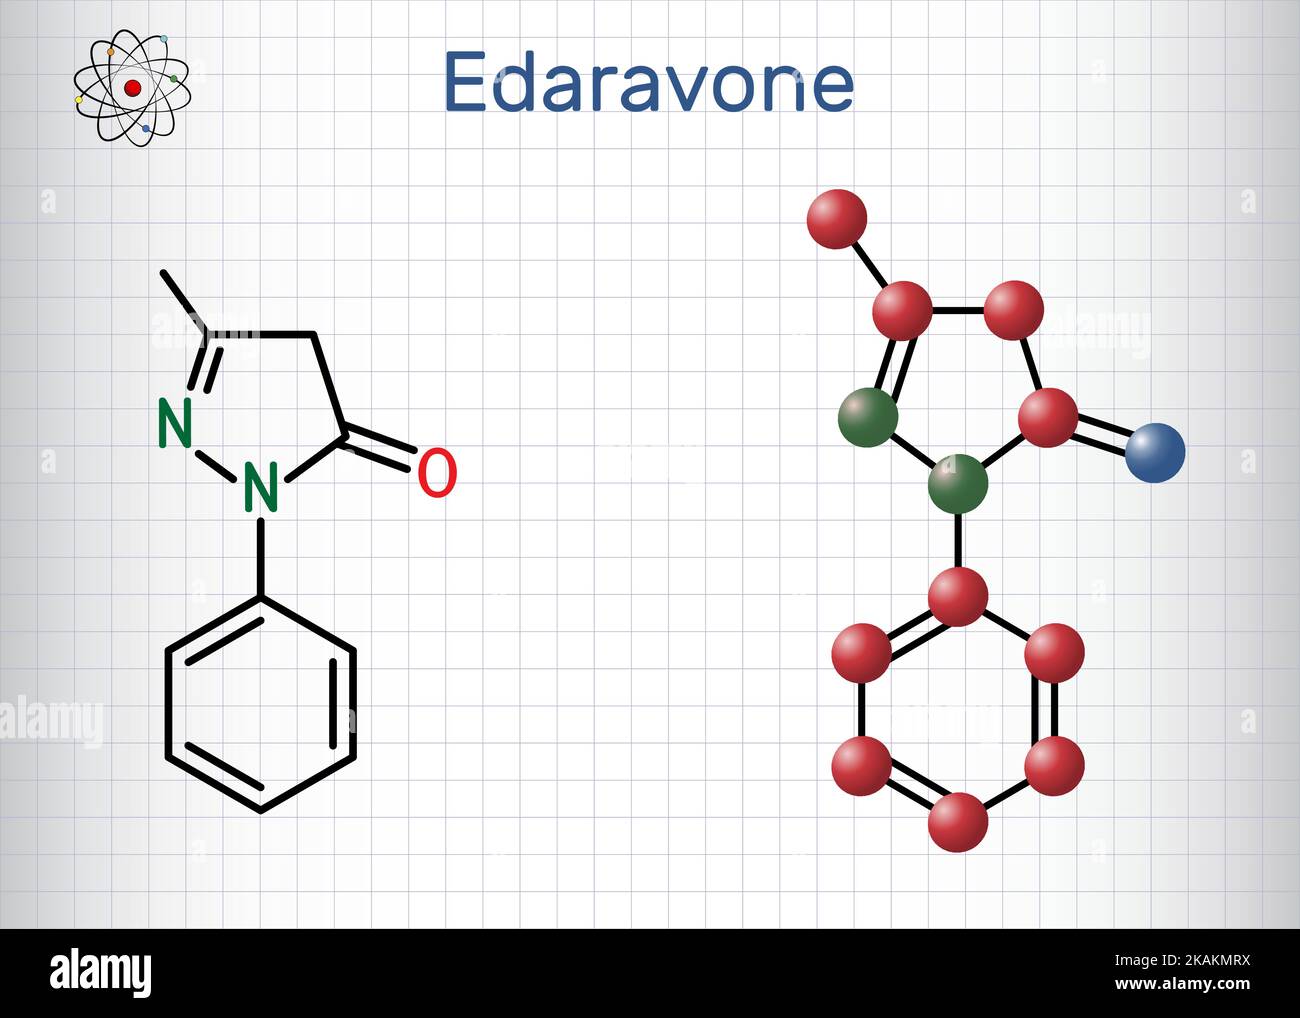 Edaravone molecule. It is used for treatment of amyotrophic lateral sclerosis ALS. Structural chemical formula, molecule model. Sheet of paper in a ca Stock Vector